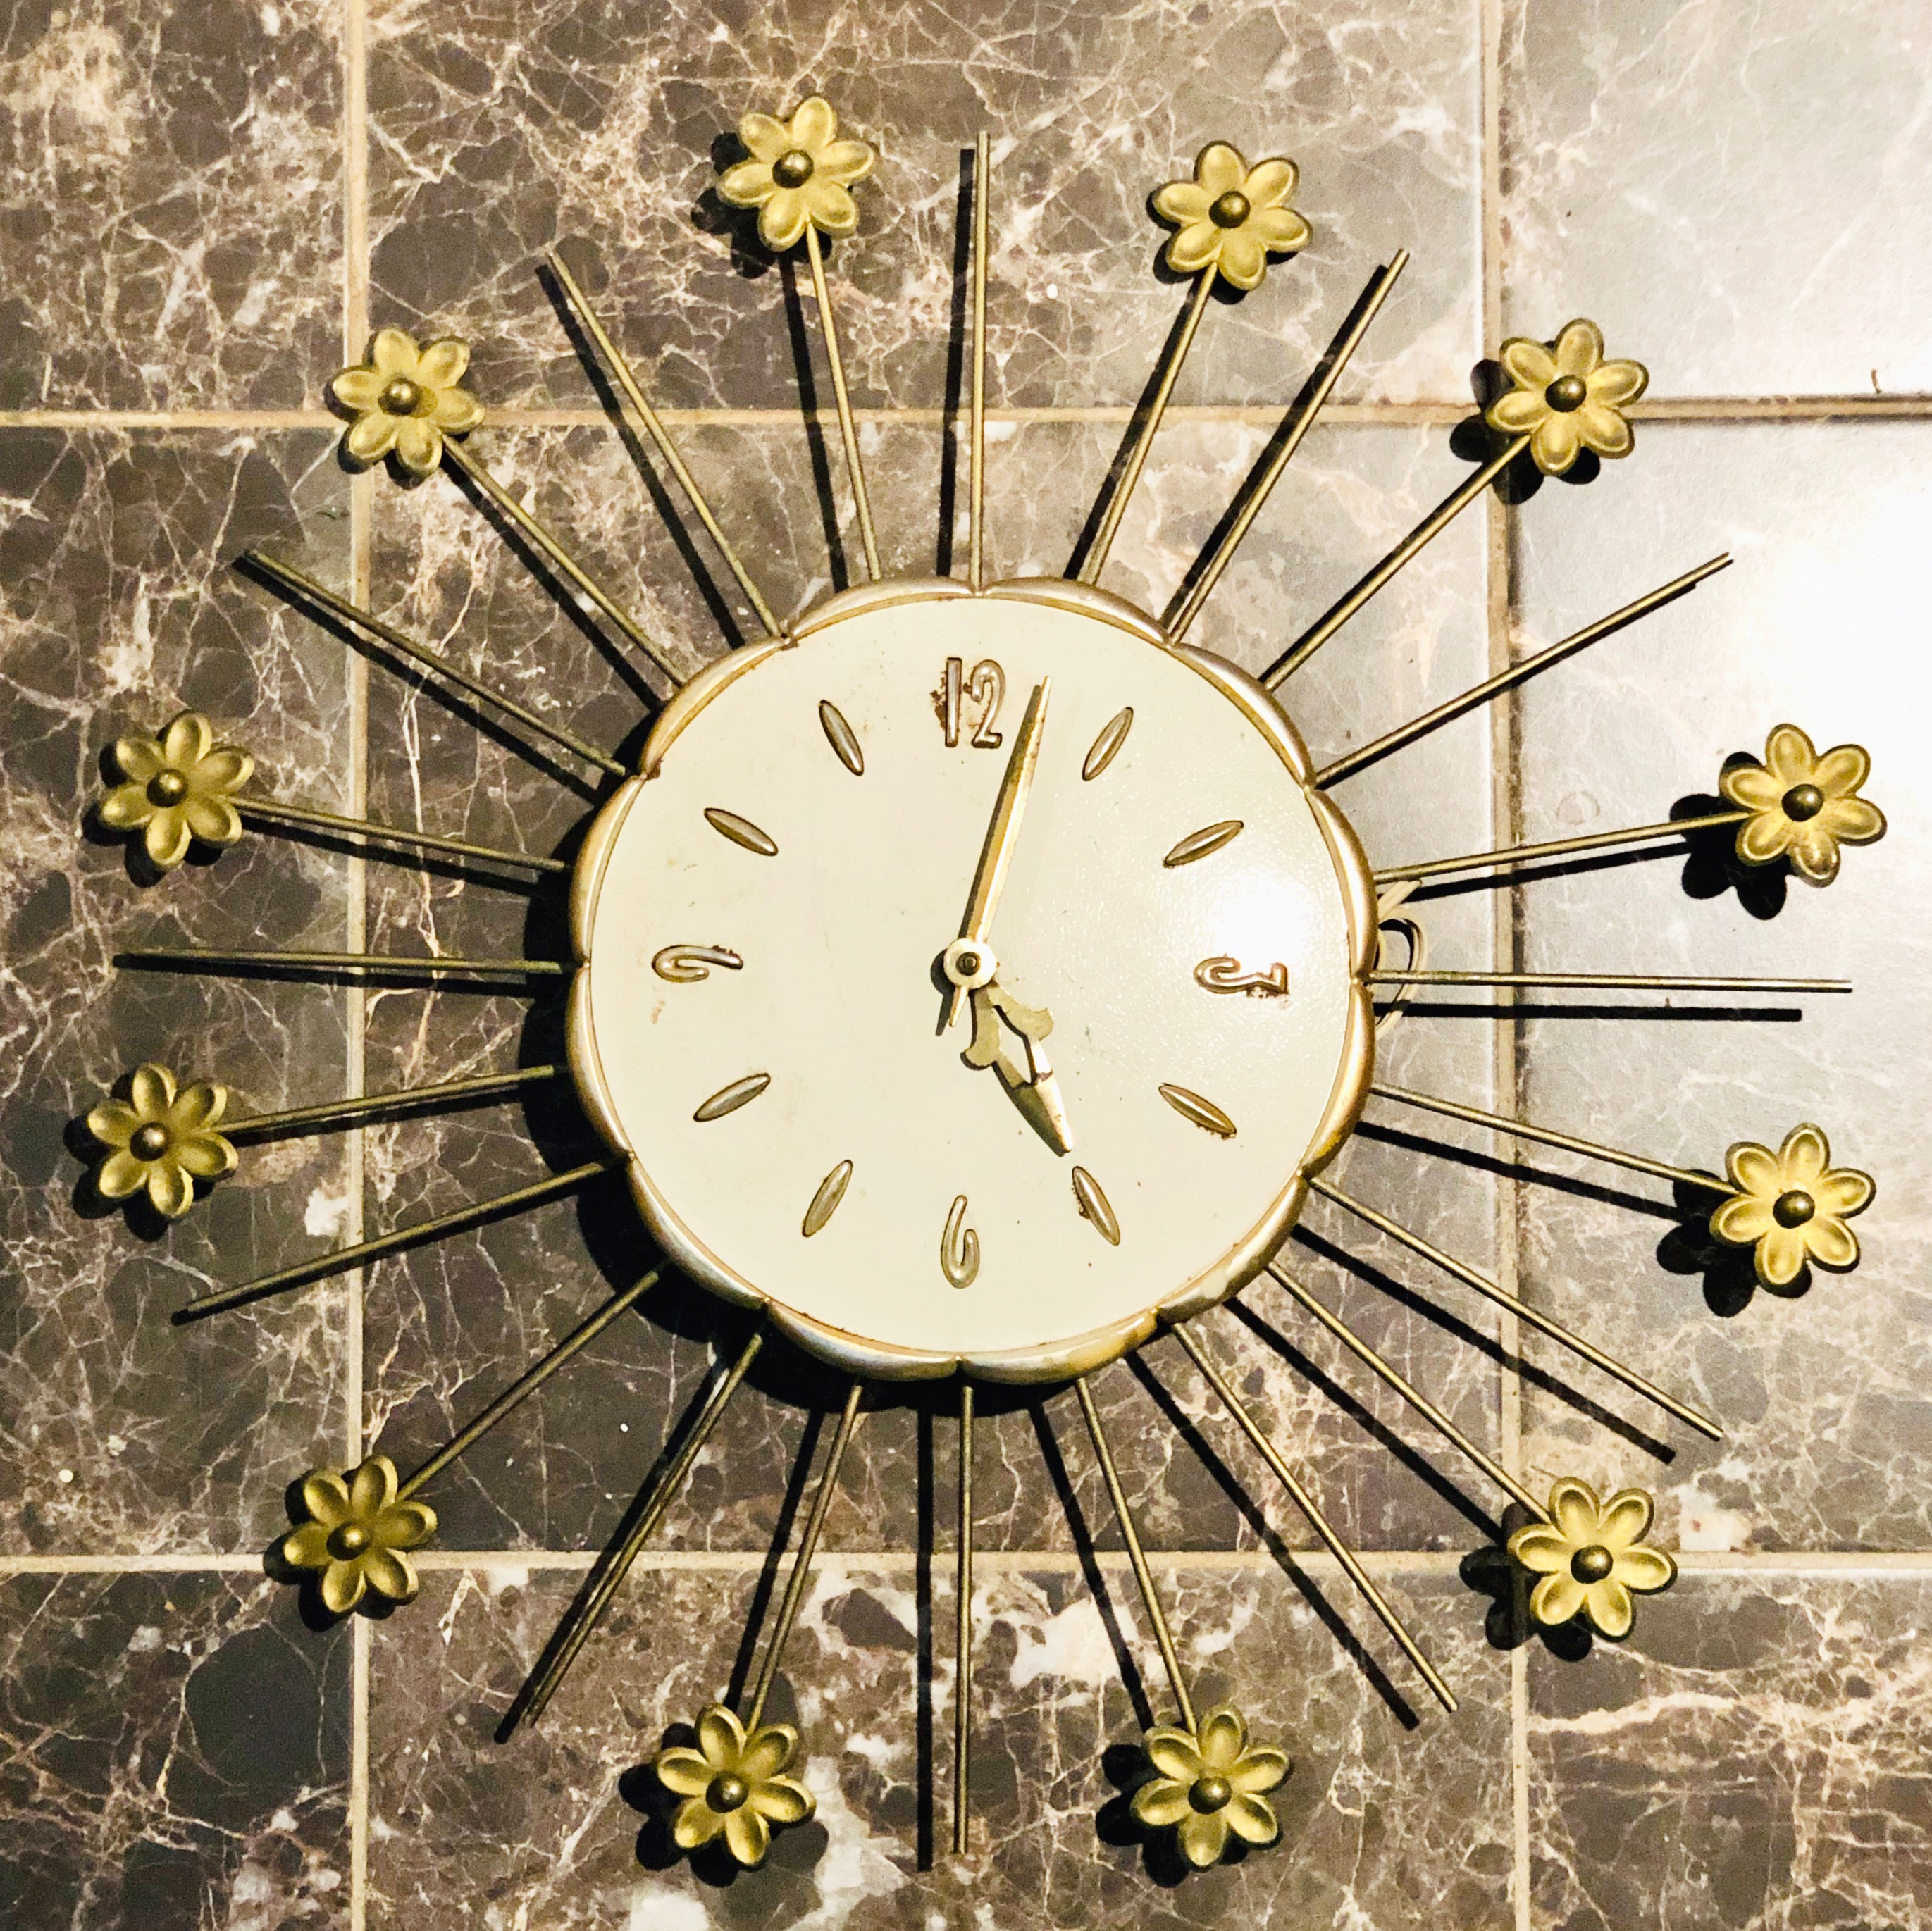 1963 Mid Century Starburst Robertshaw Controls Company Flowers Wall Clock. Made in USA.